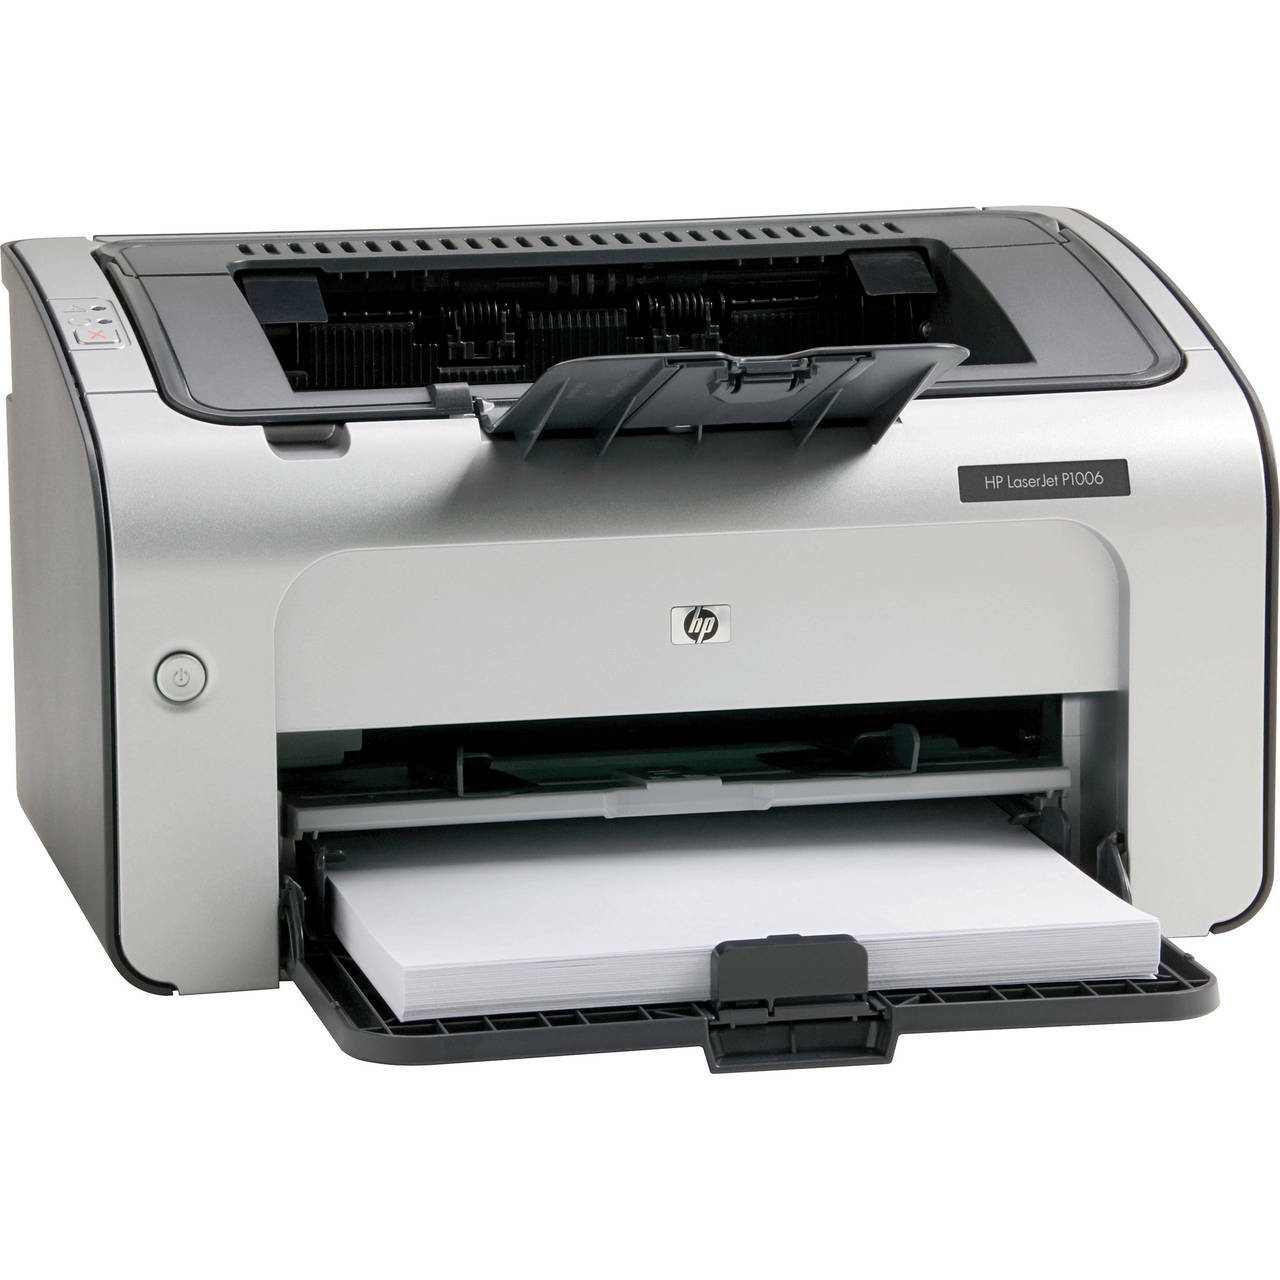 hp laserjet p1006 compatible with windows 10